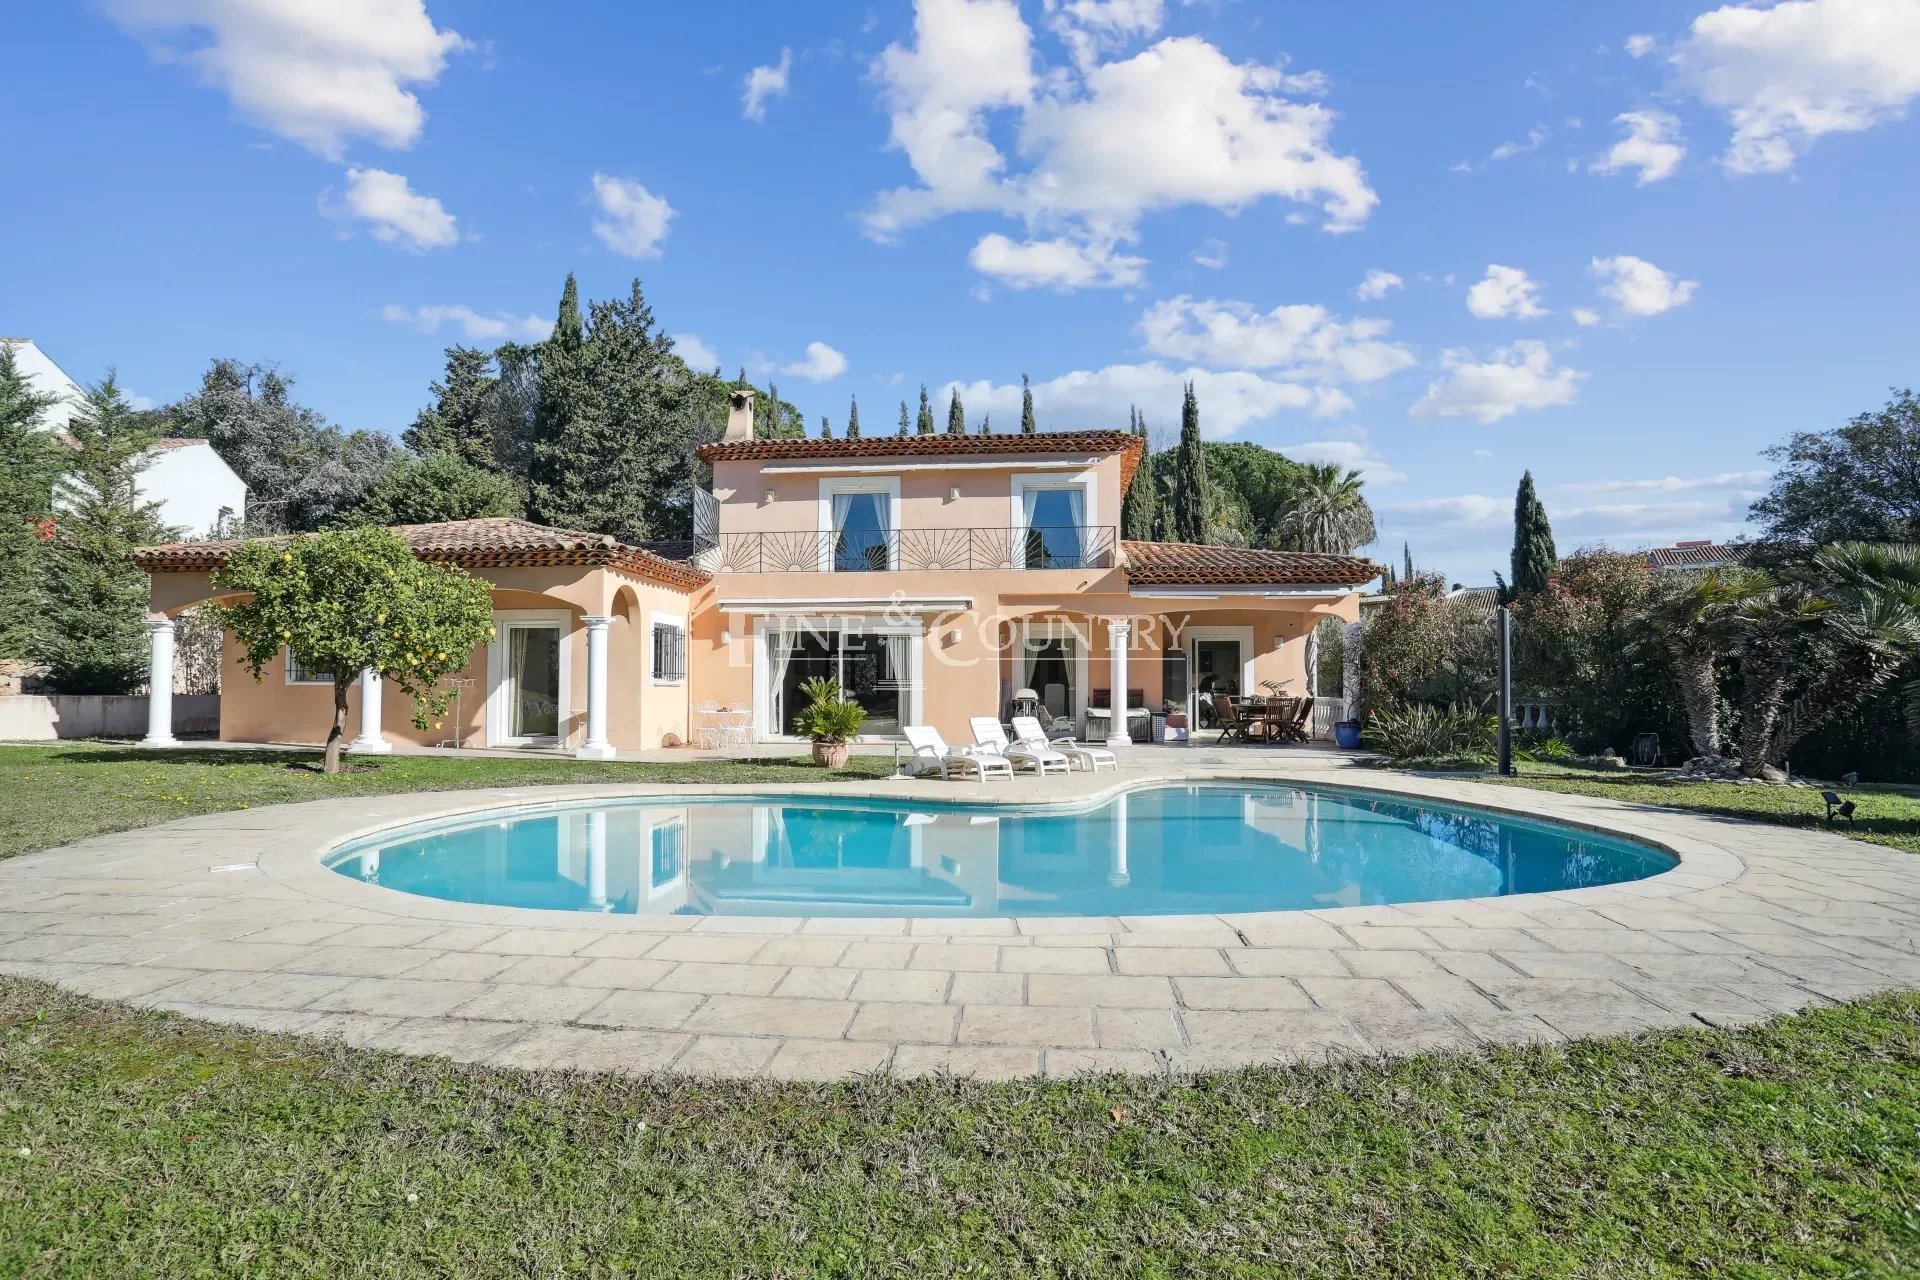 Recent Villa for sale in Mandelieu, Cote d’Azur, 5mn away from golf and beach Accommodation in Cannes